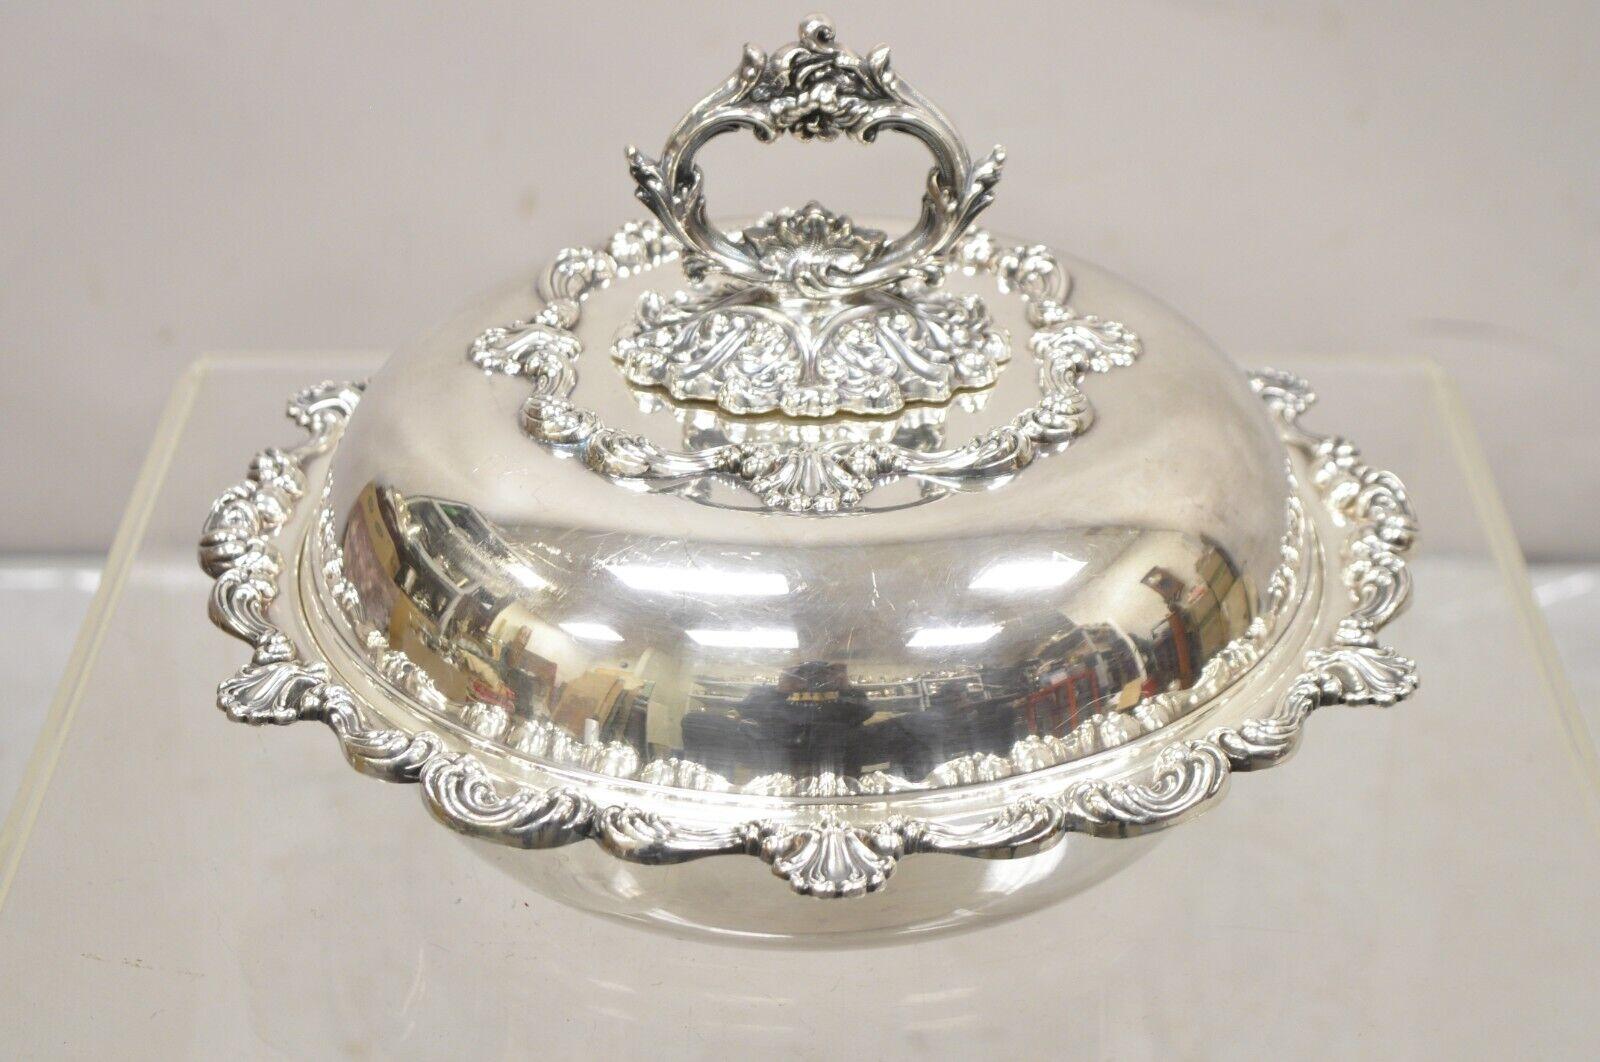 Antique English Victorian Ornate Round Silver Plated Rococo Lidded Serving Dish. Item features a heavy ornate removable handle, nice deep form, original hallmark, very nice vintage item. Circa Early to Mid  20th Century. Measurements:  8